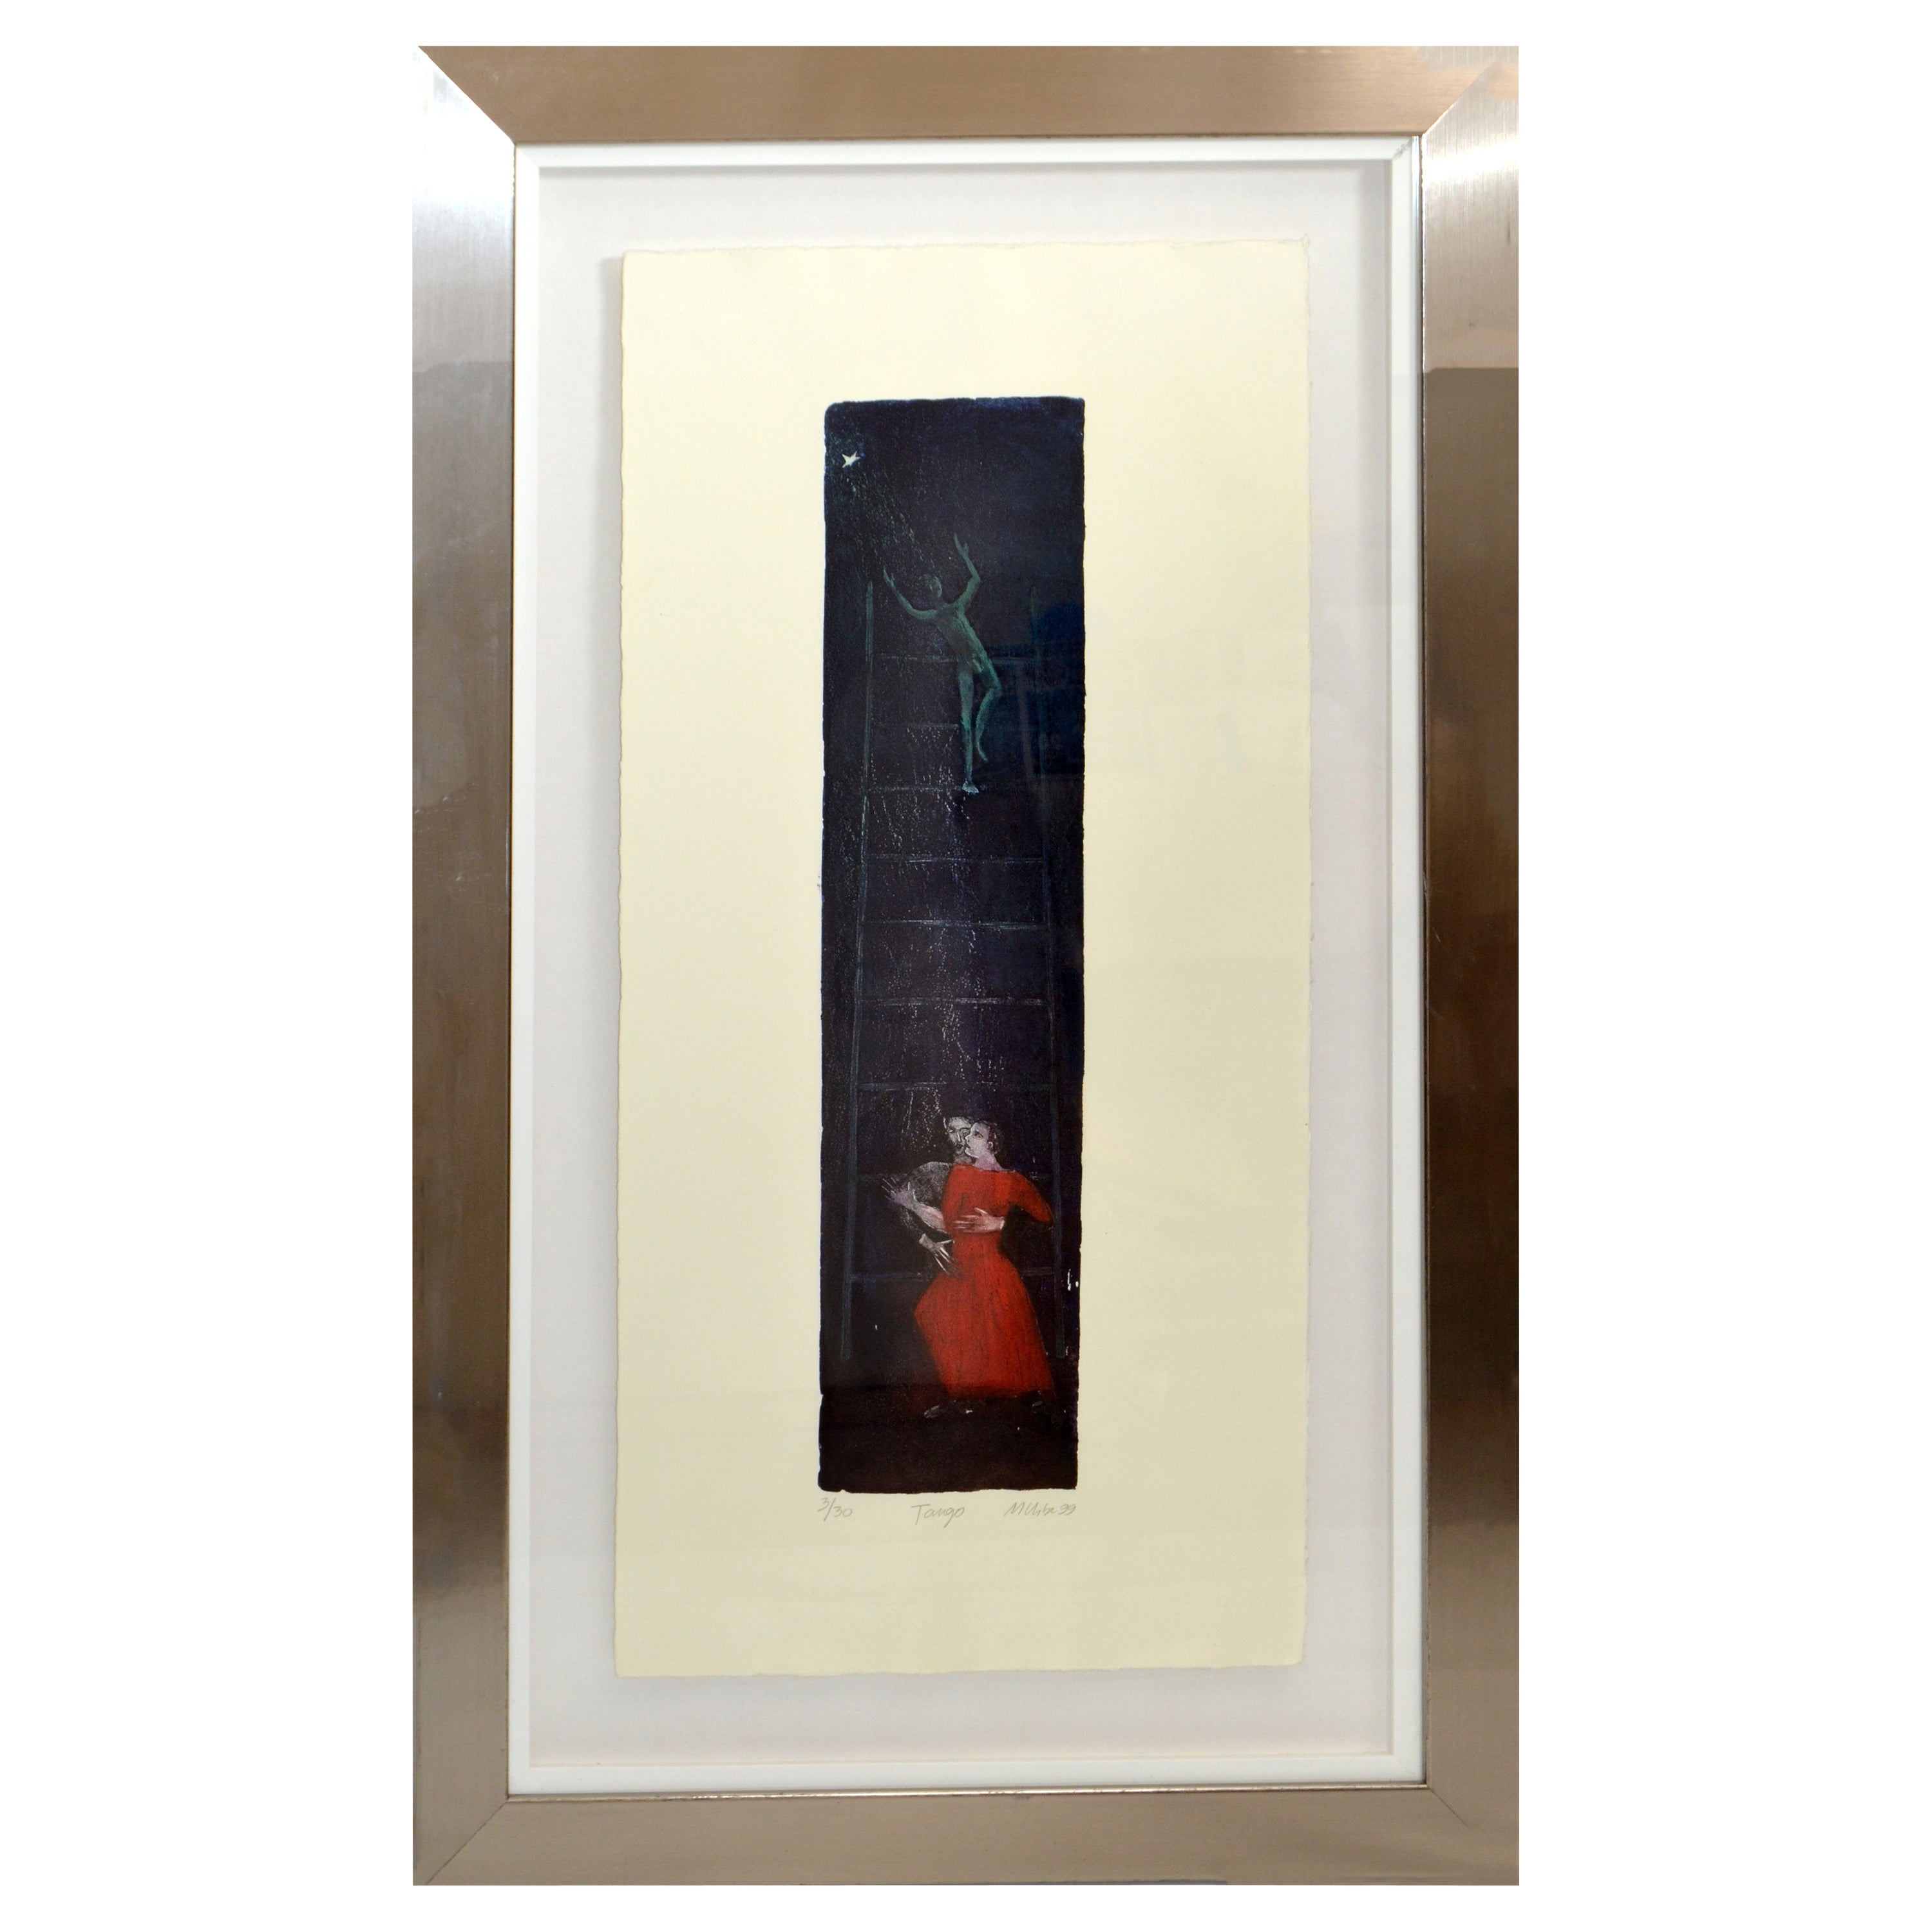 Signed Titled Tango Chrome Framed French Artist Signed Lithography Etching 1999